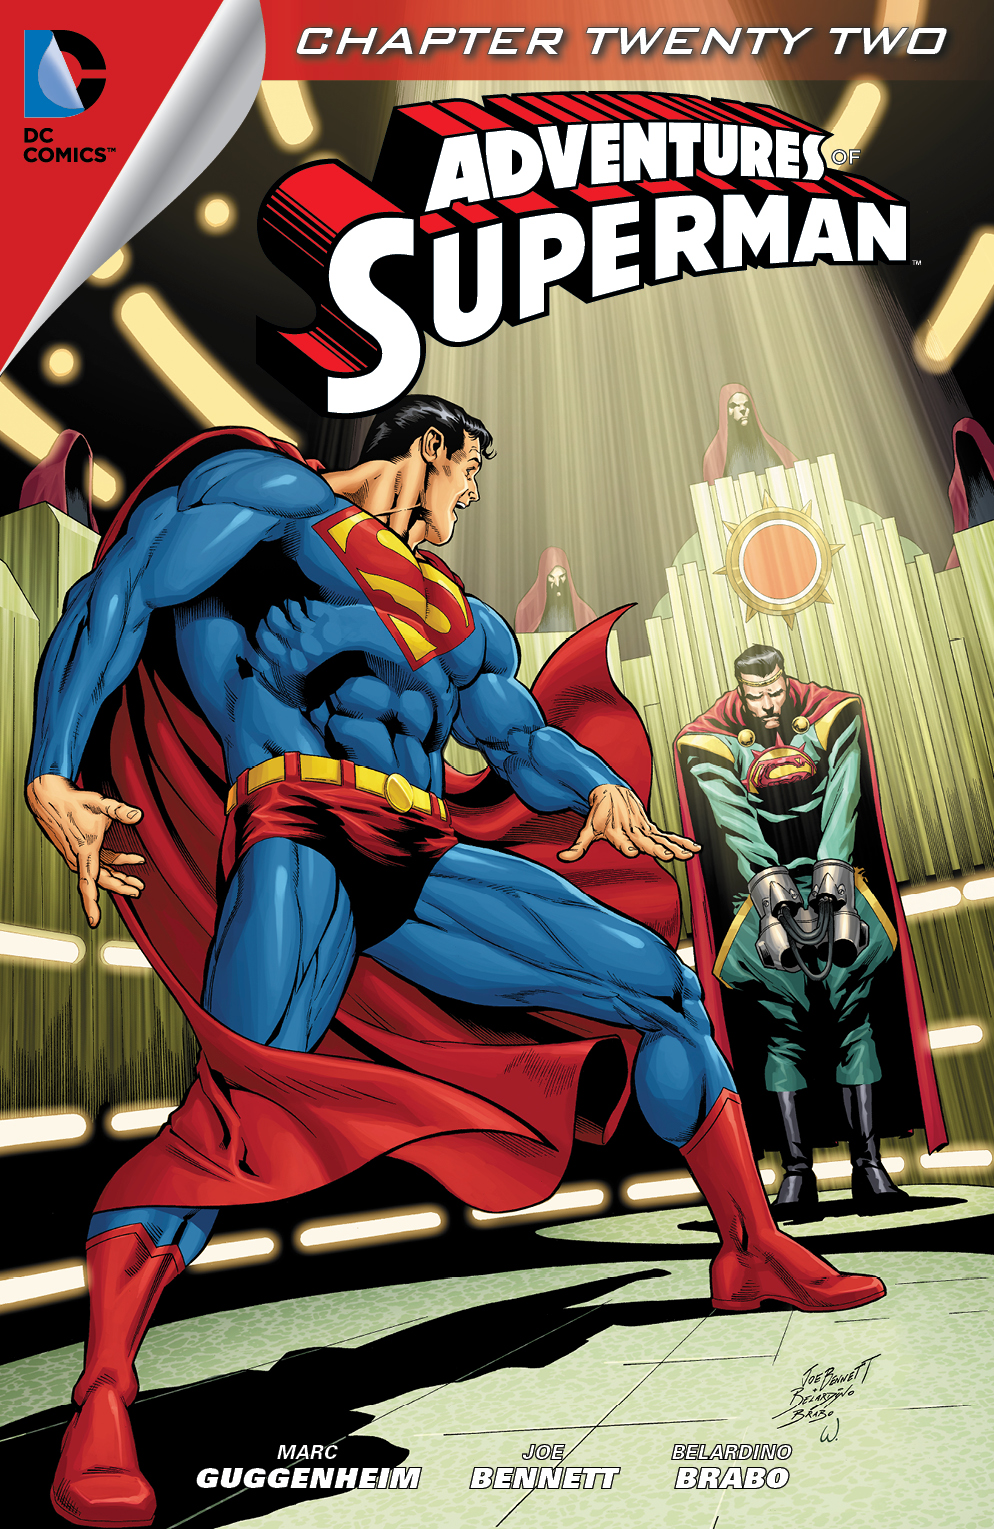 Adventures of Superman (2013-) #22 preview images